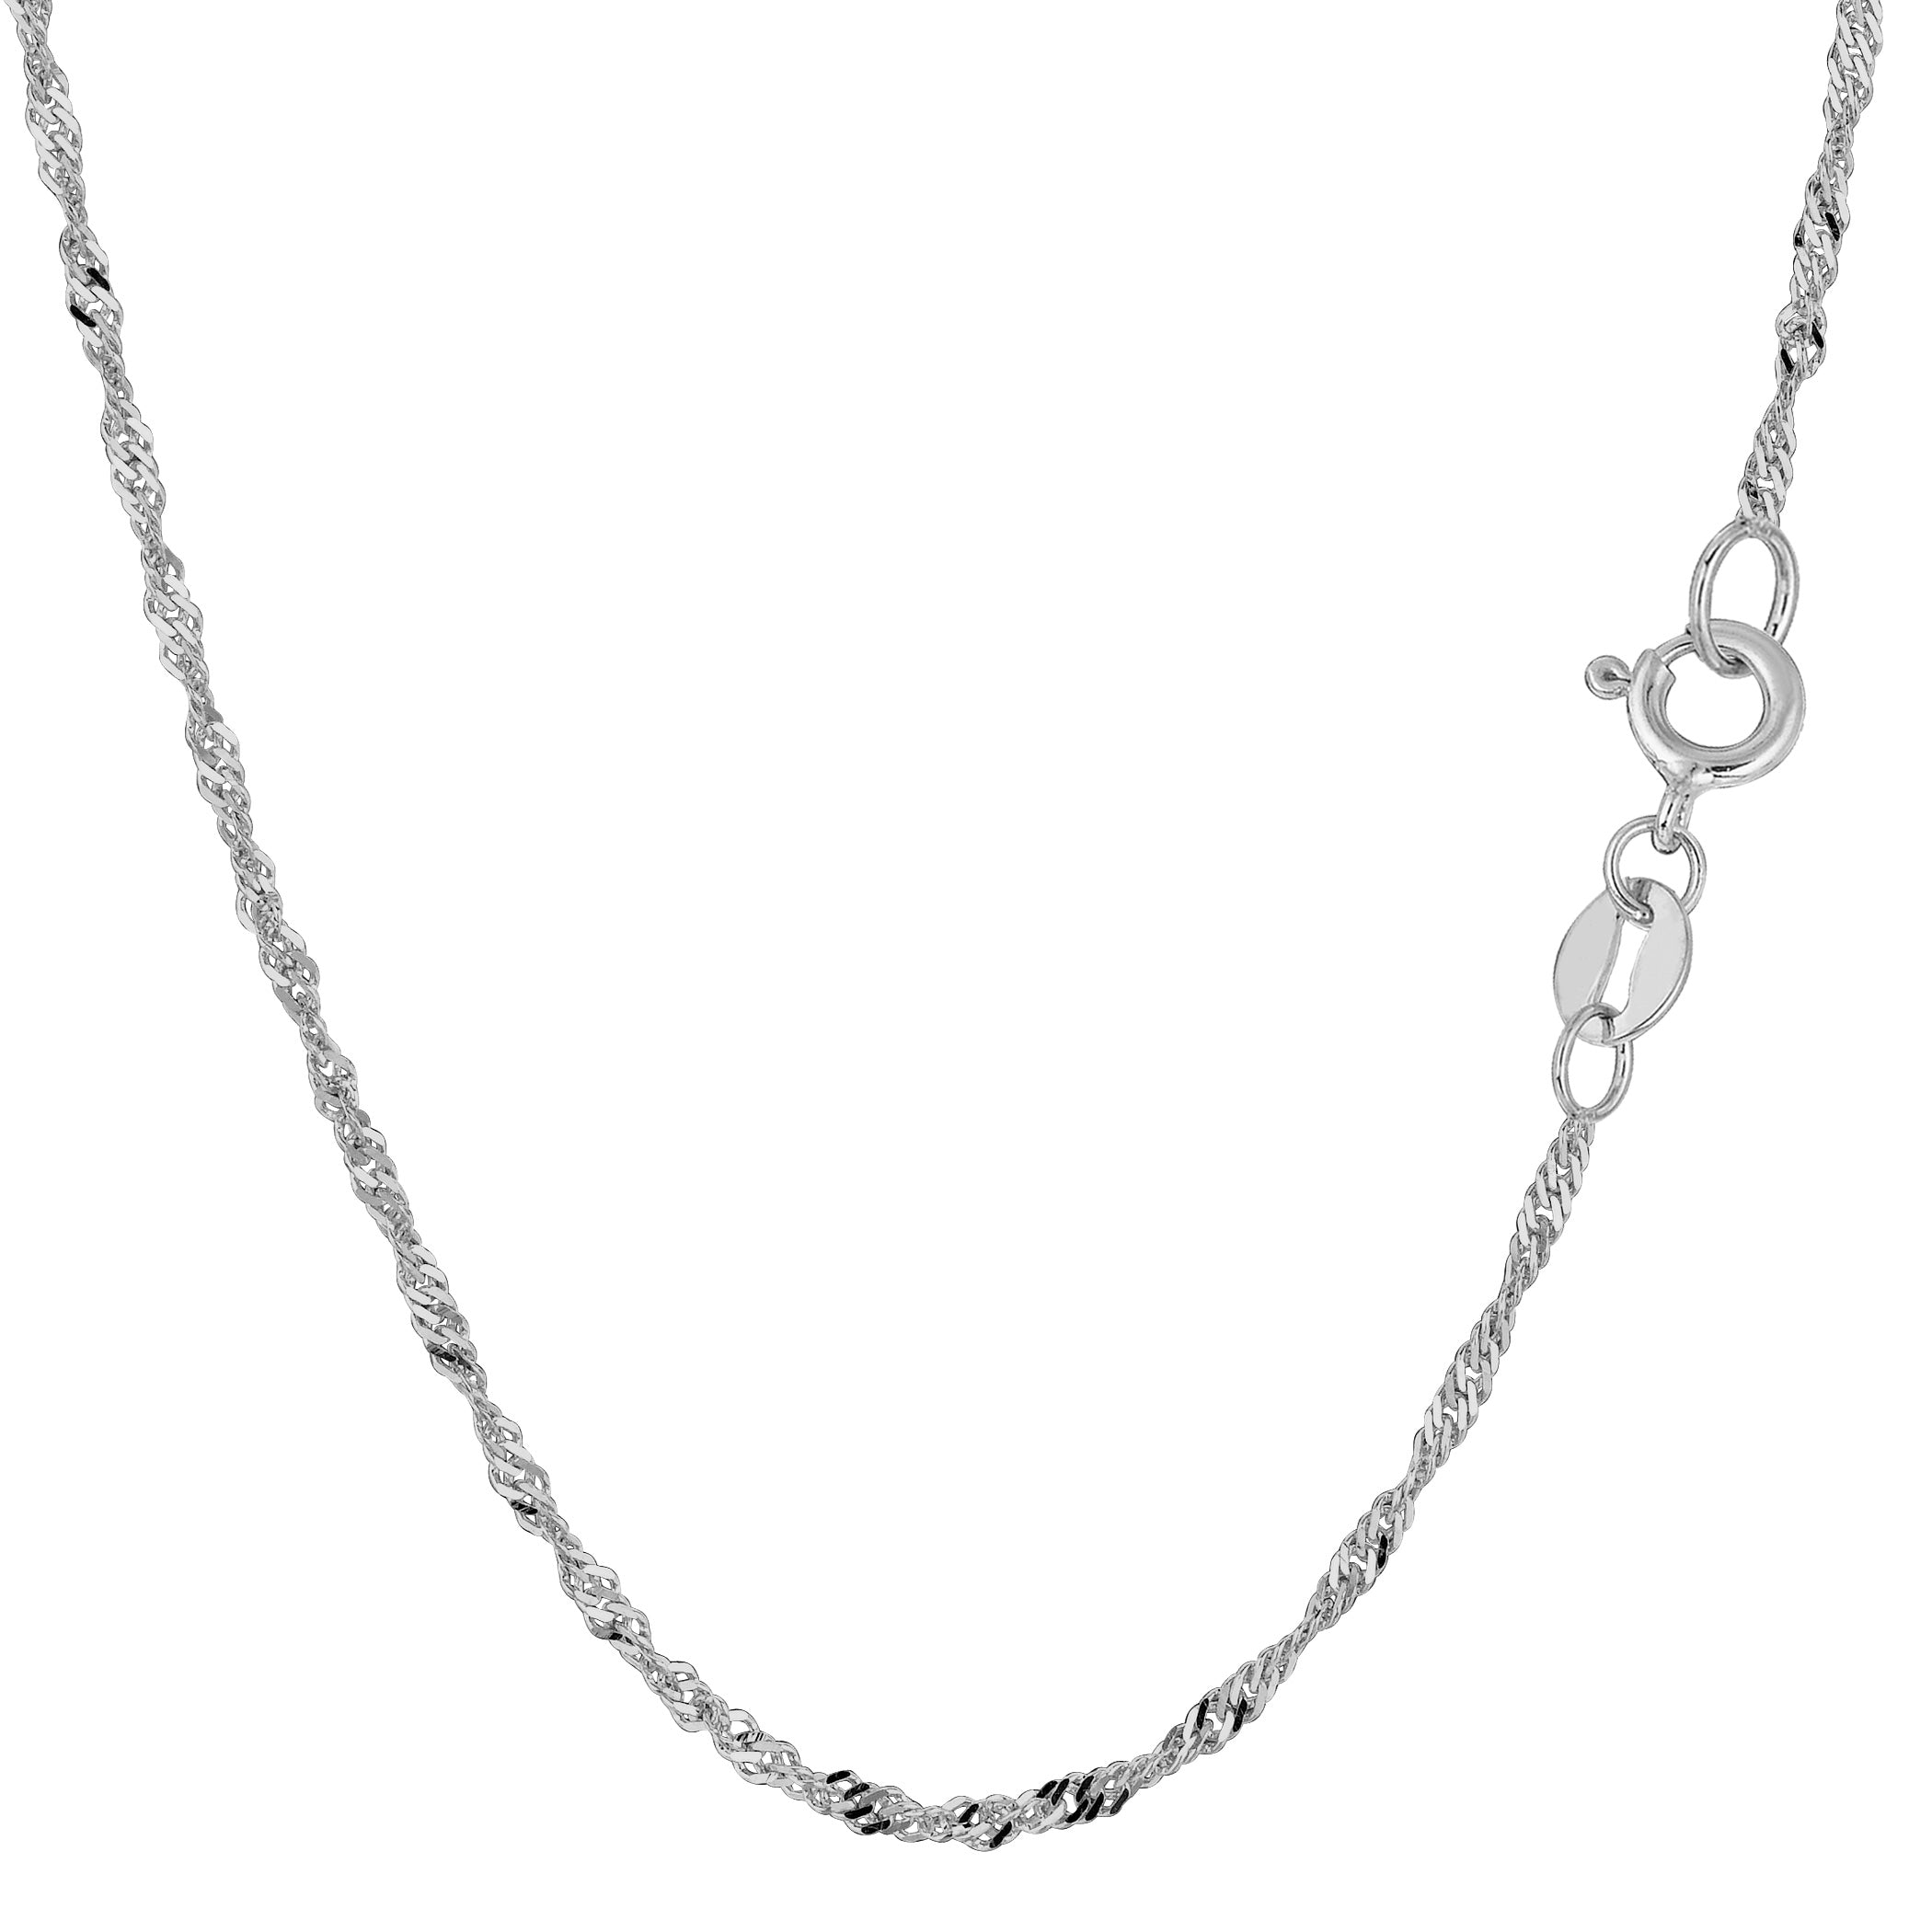 10k White Gold Singapore Chain Necklace, 1.7mm